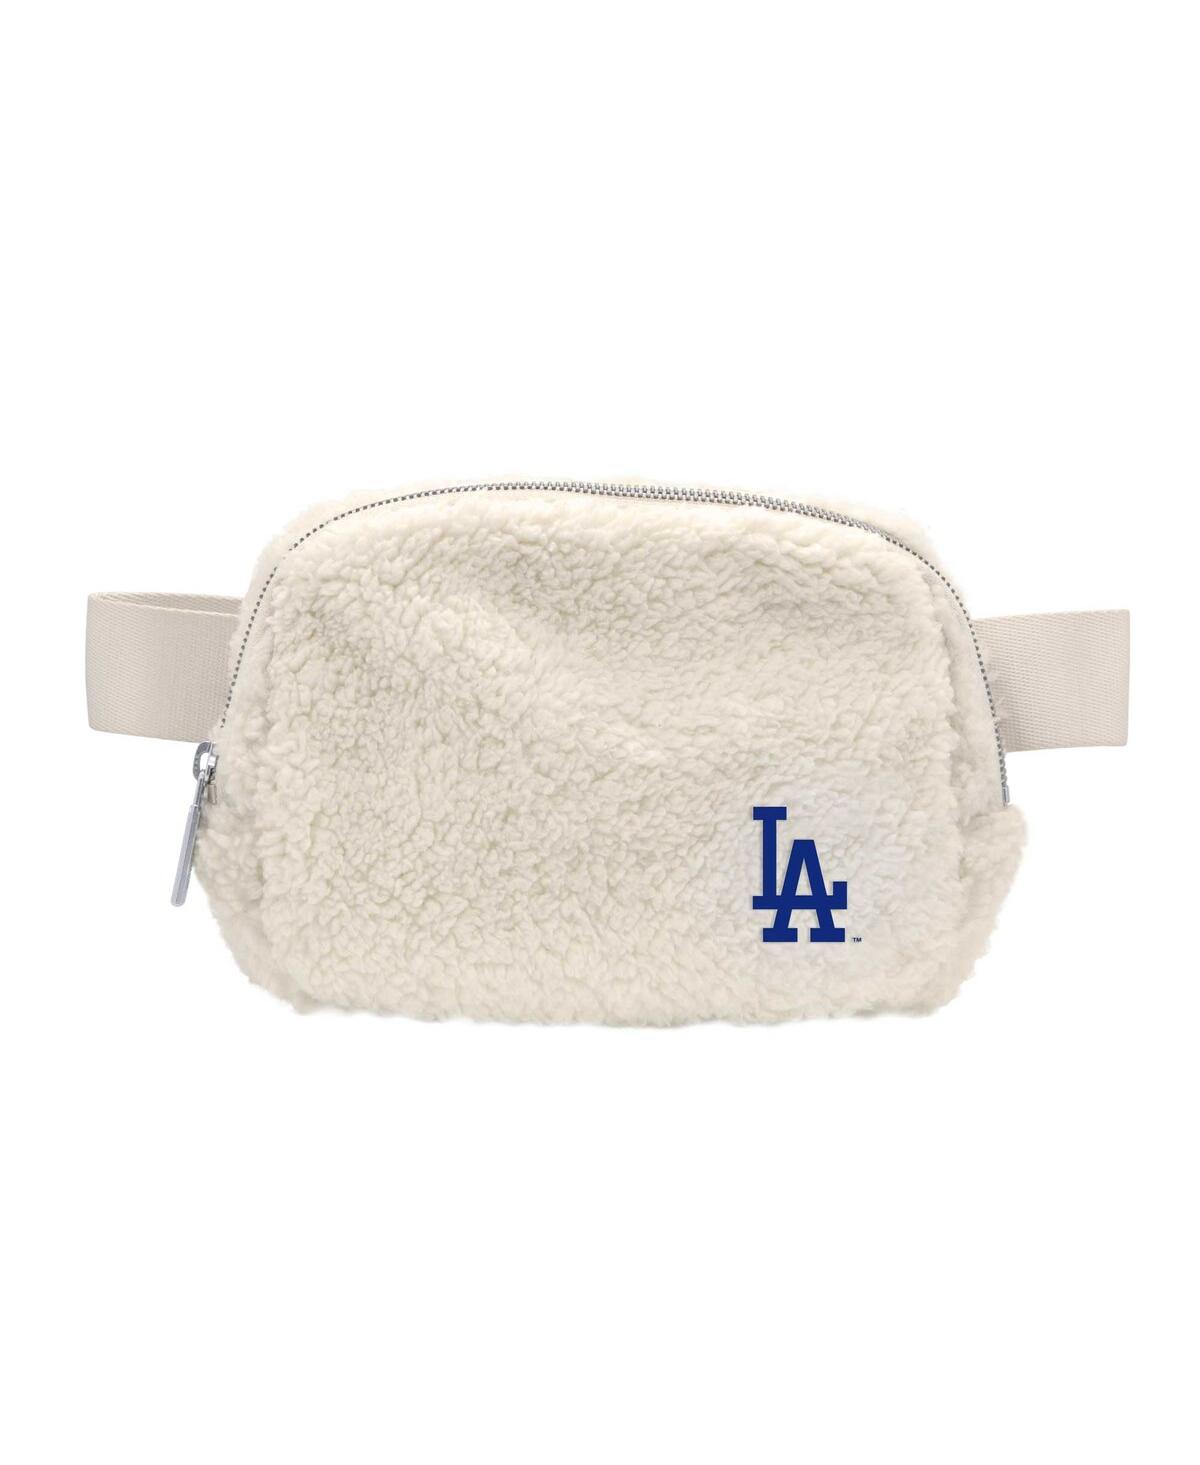 Men's and Women's Los Angeles Dodgers Sherpa Fanny Pack - White